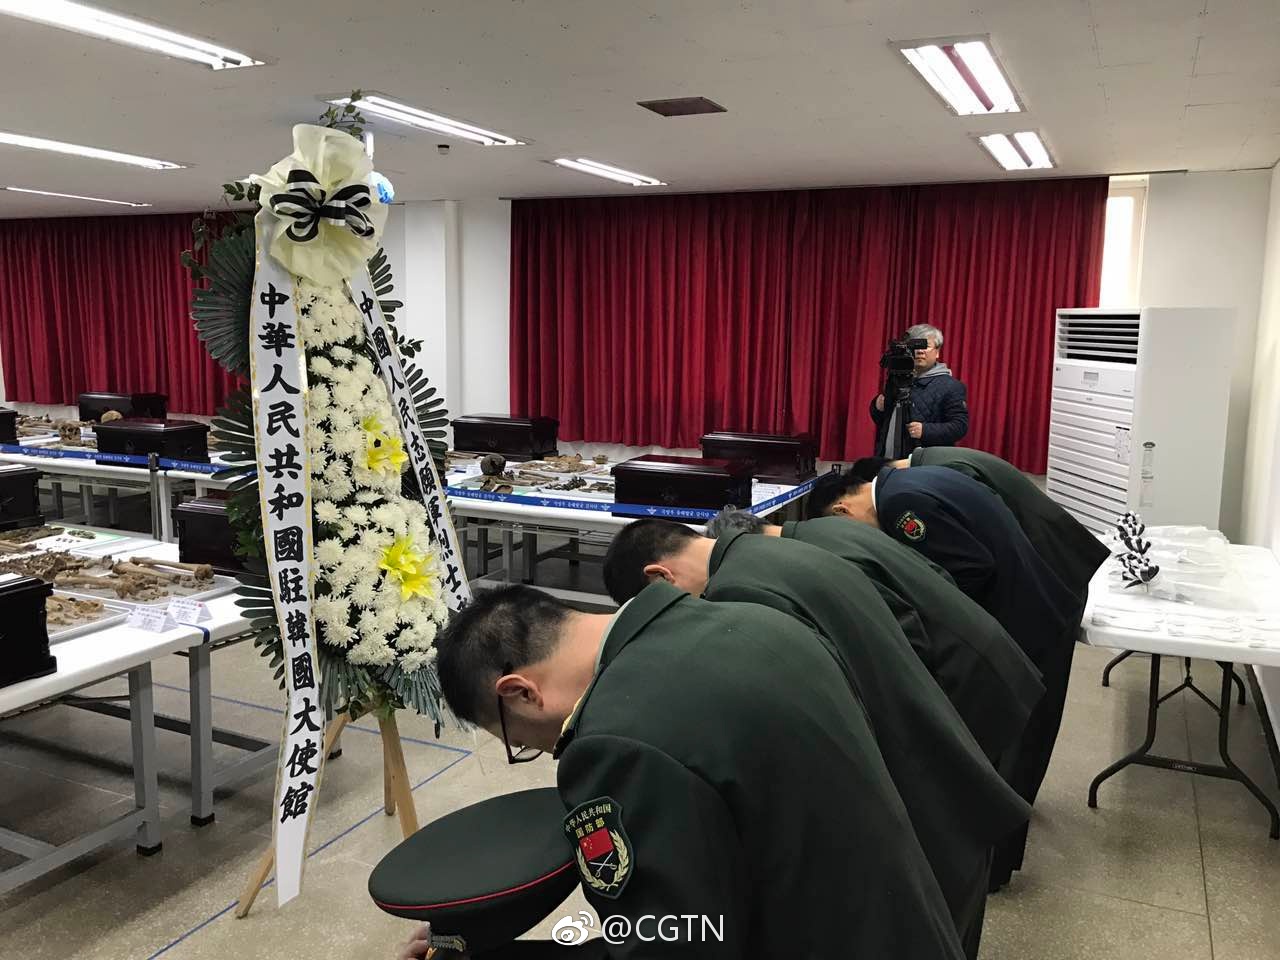 A ceremony is held in Incheon, S. Korea on Monday to return the remains of 28 Chinese soldiers killed in the 1950-1953 Korean War. [Photo: weibo.com]